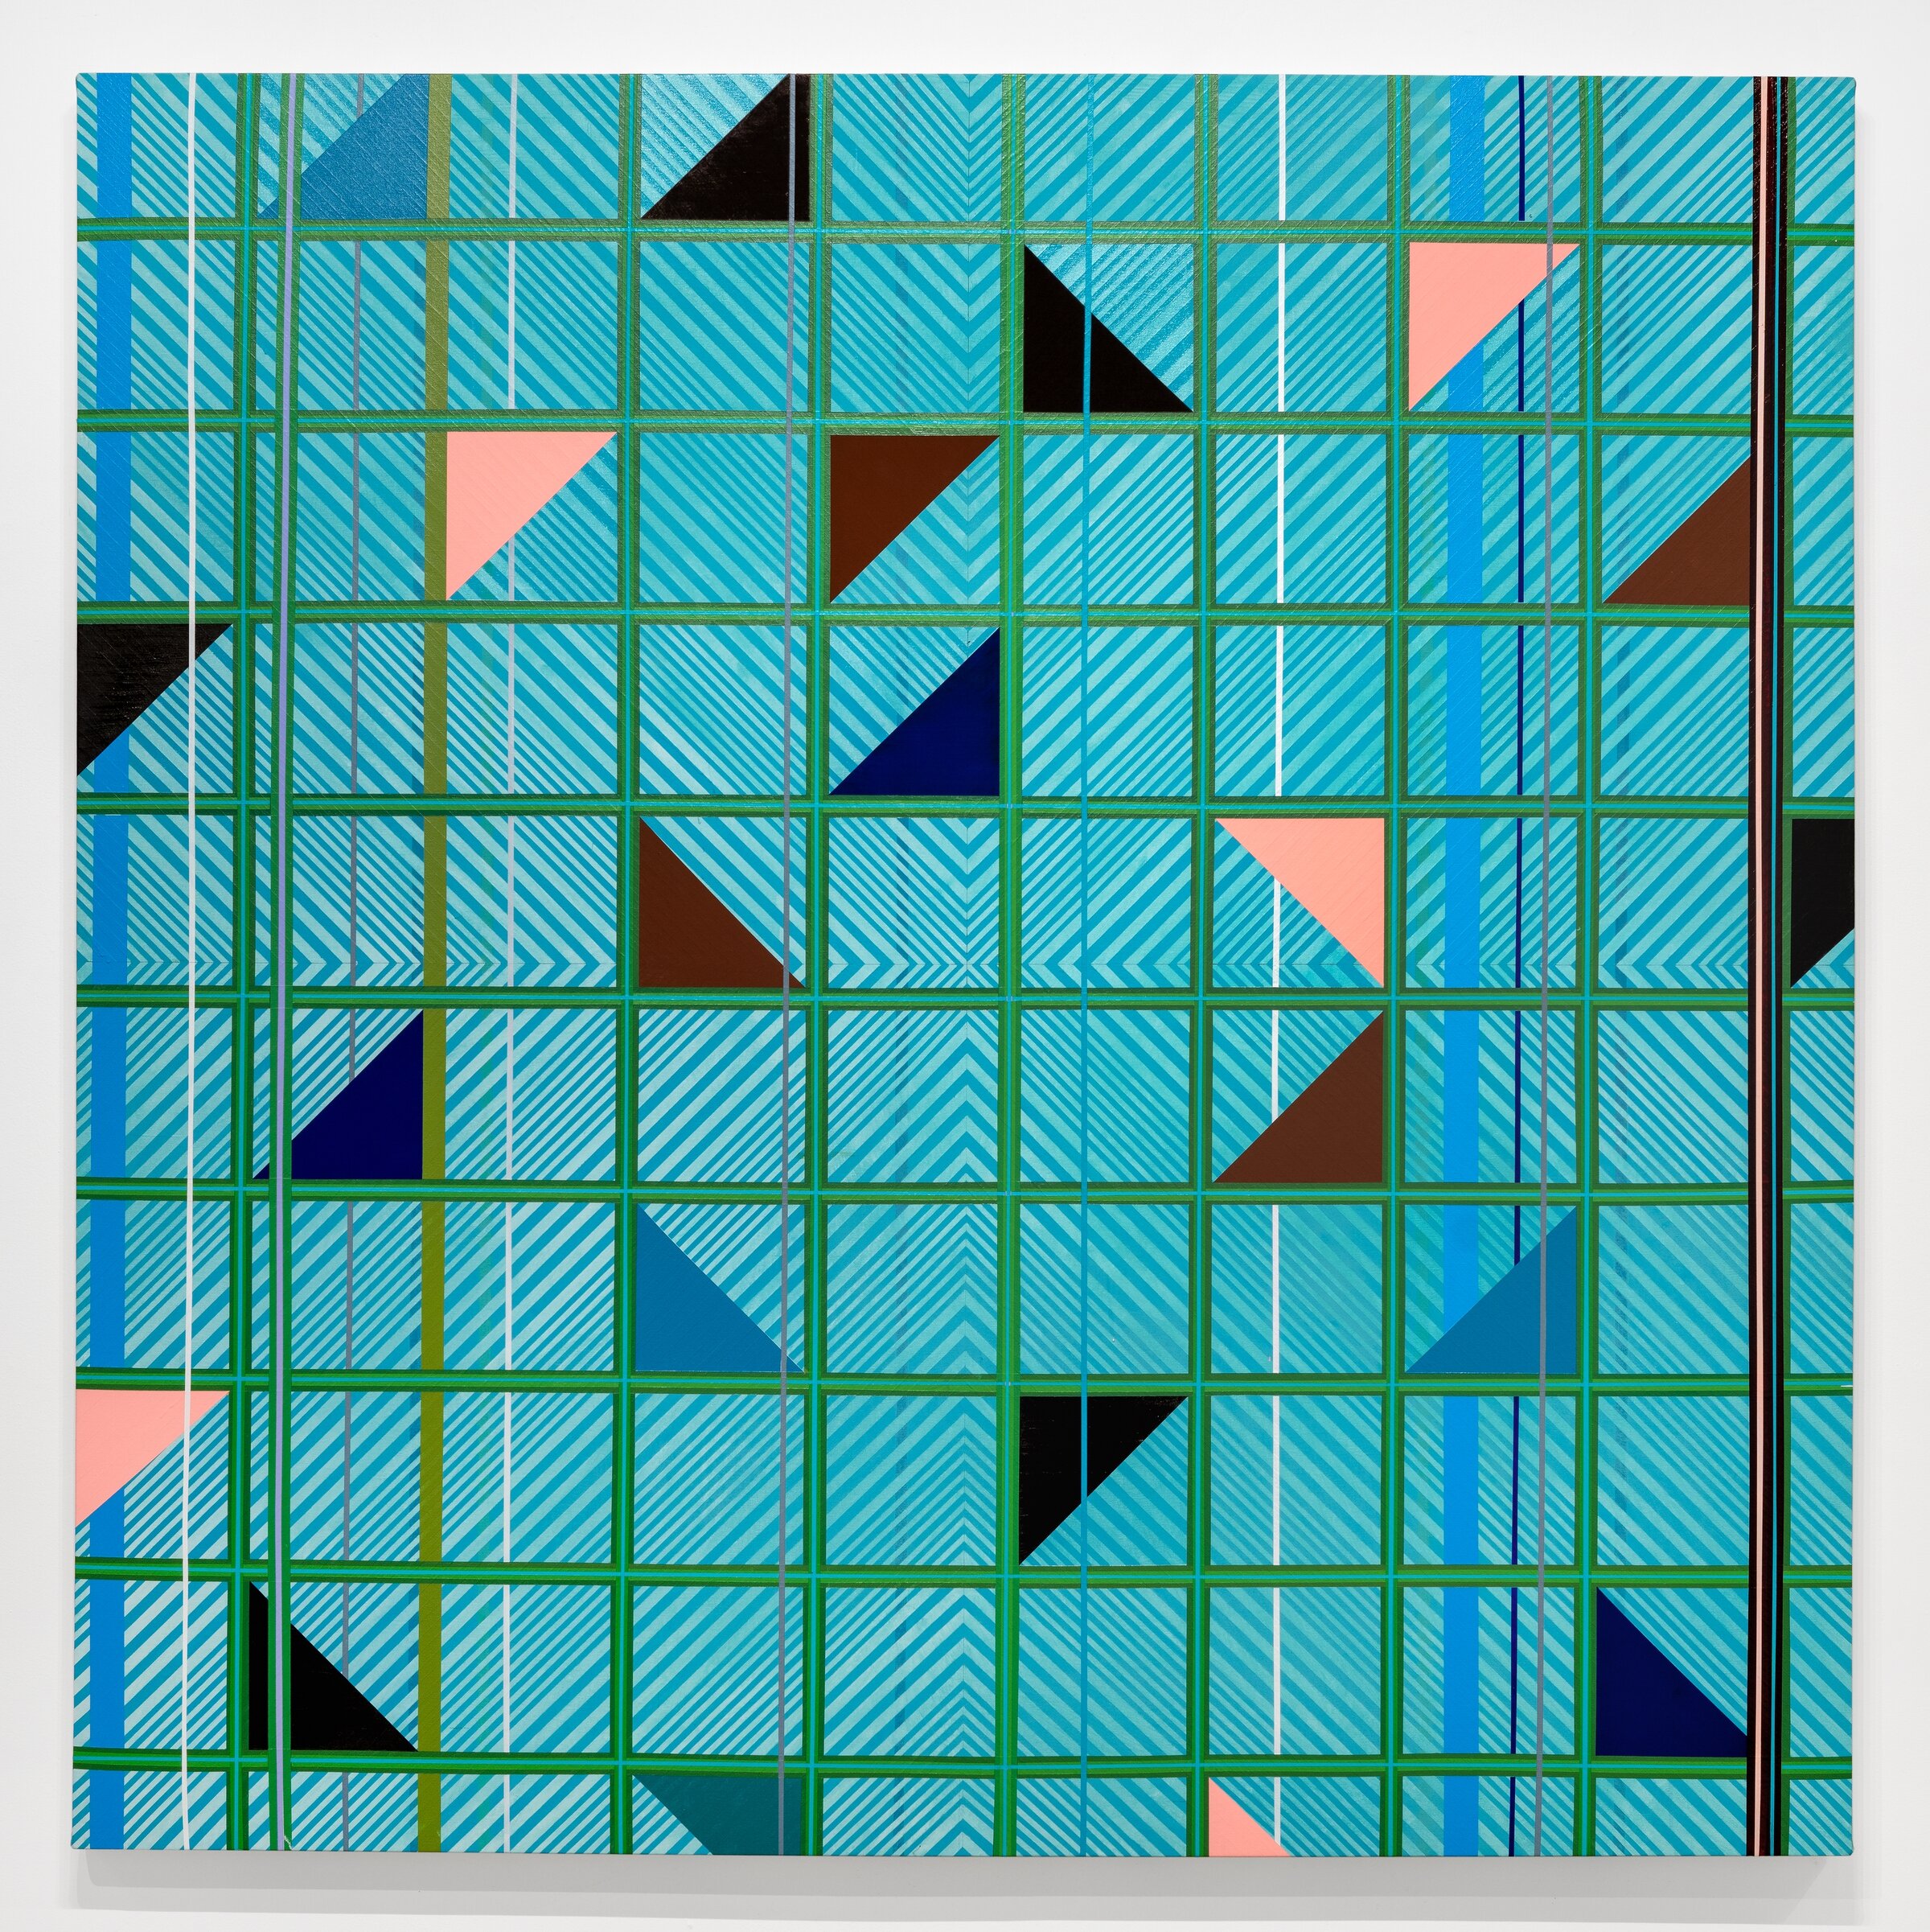   Kelley Johnson   Untitled,  2020 Acrylic and flashe on canvas 74 x 74 inches 